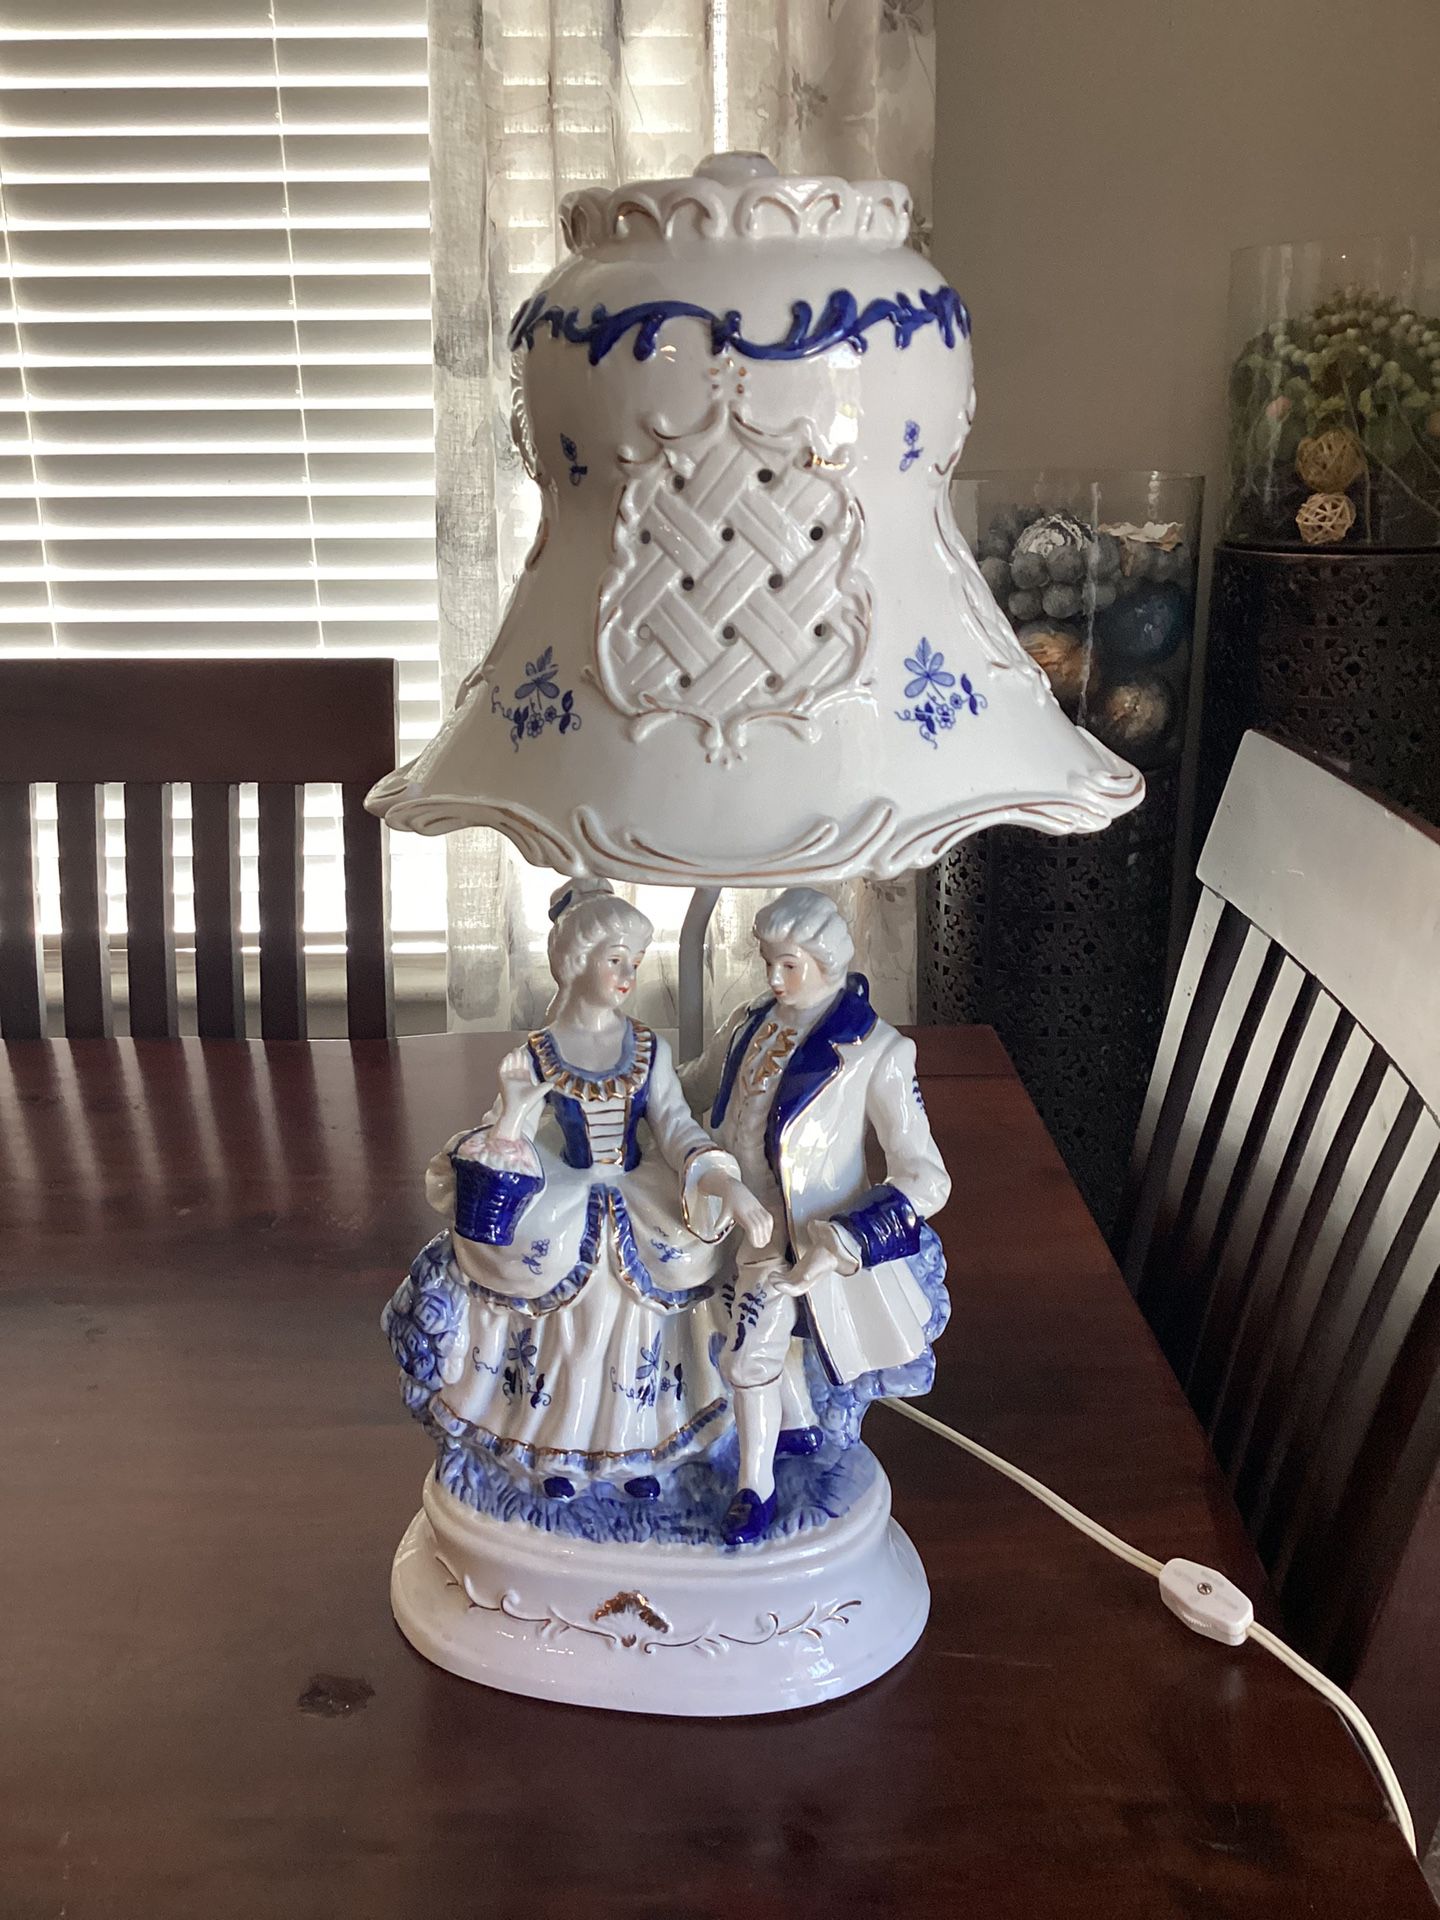 ca. 1920s Victorian-Colonial Style Blue/White Porcelain Man/Woman Lamp/Shade 20”